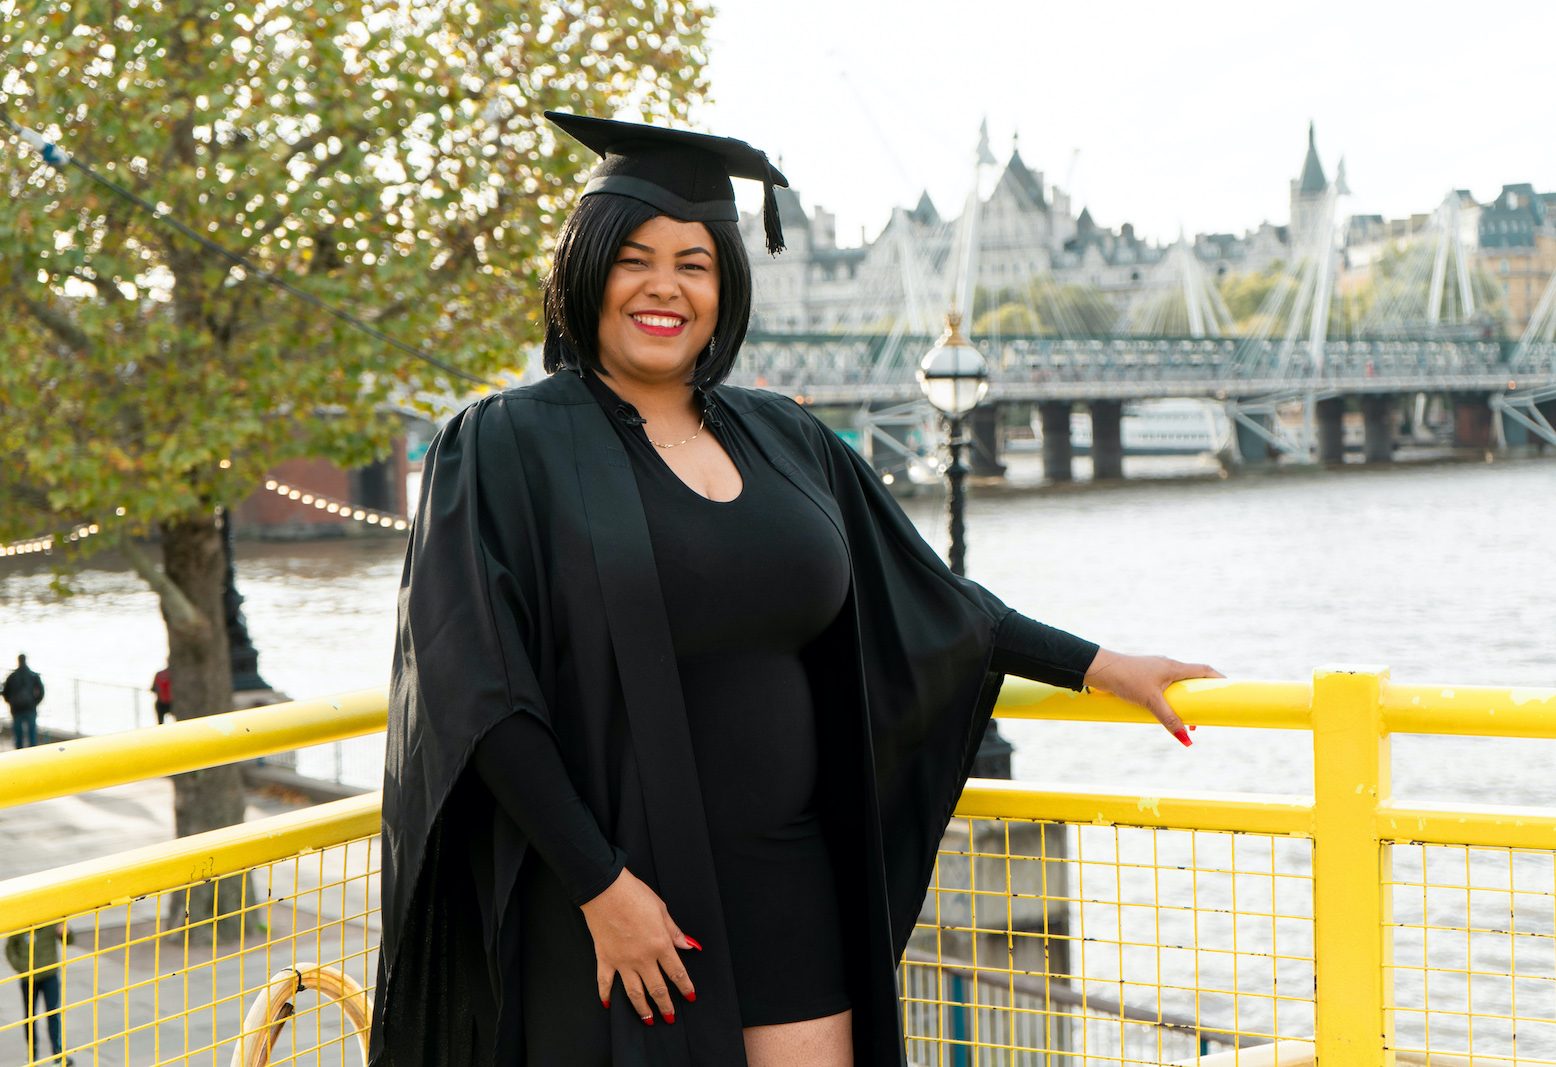 Smiling Beam member Decoda in a graduate's black cap and gown standing in front of London's Golden Jubilee Bridge and trees on the south bank of the Thames as she holds a yellow railing